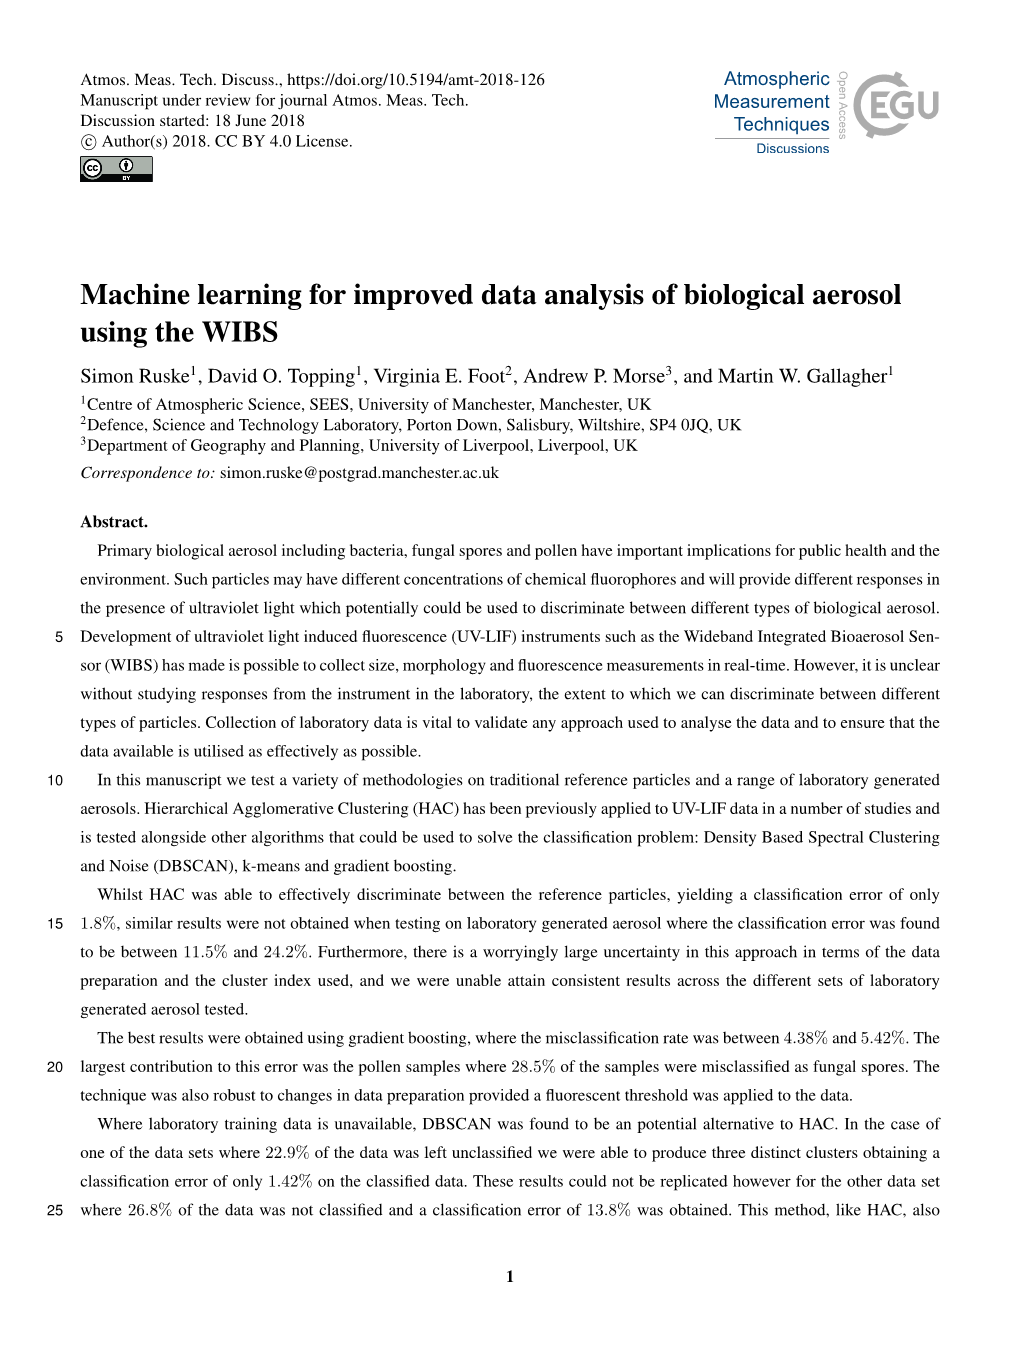 Machine Learning for Improved Data Analysis of Biological Aerosol Using the WIBS Simon Ruske1, David O